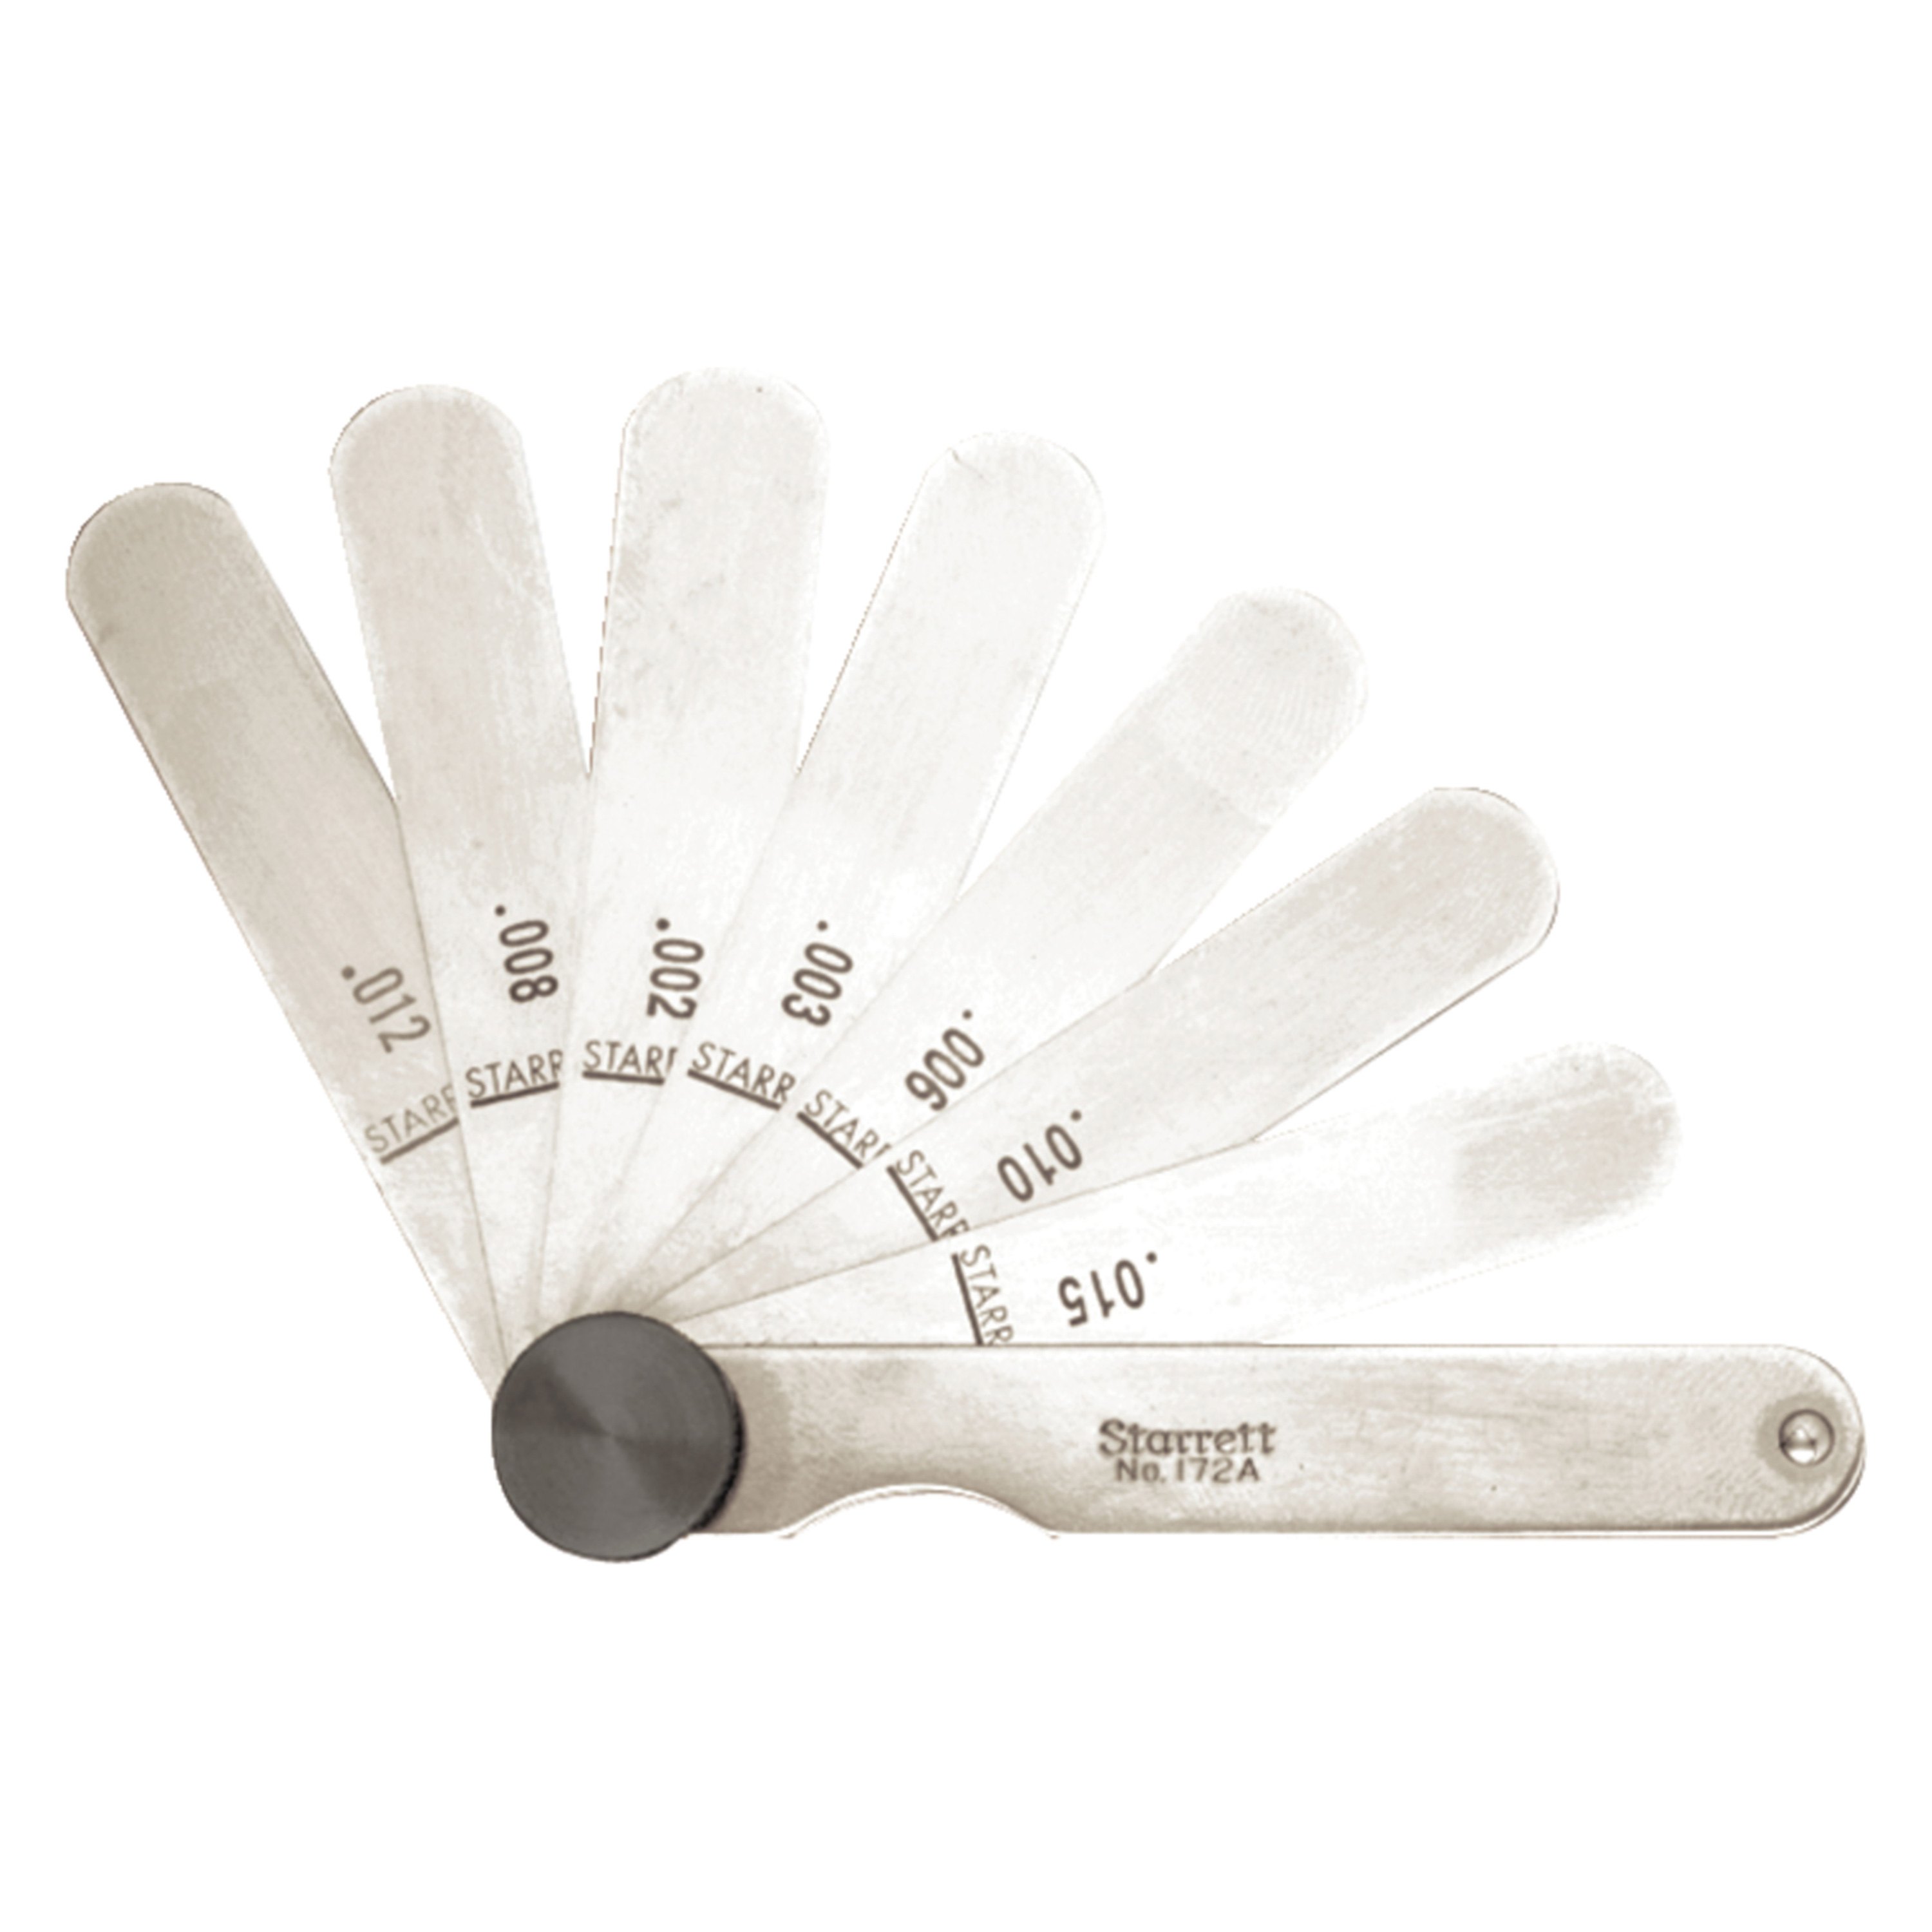 Starrett 172A Thickness Gage Set With Straight Leaves 0.0015-0.015 Thickness 3-1/32 Length 9 Leaves 